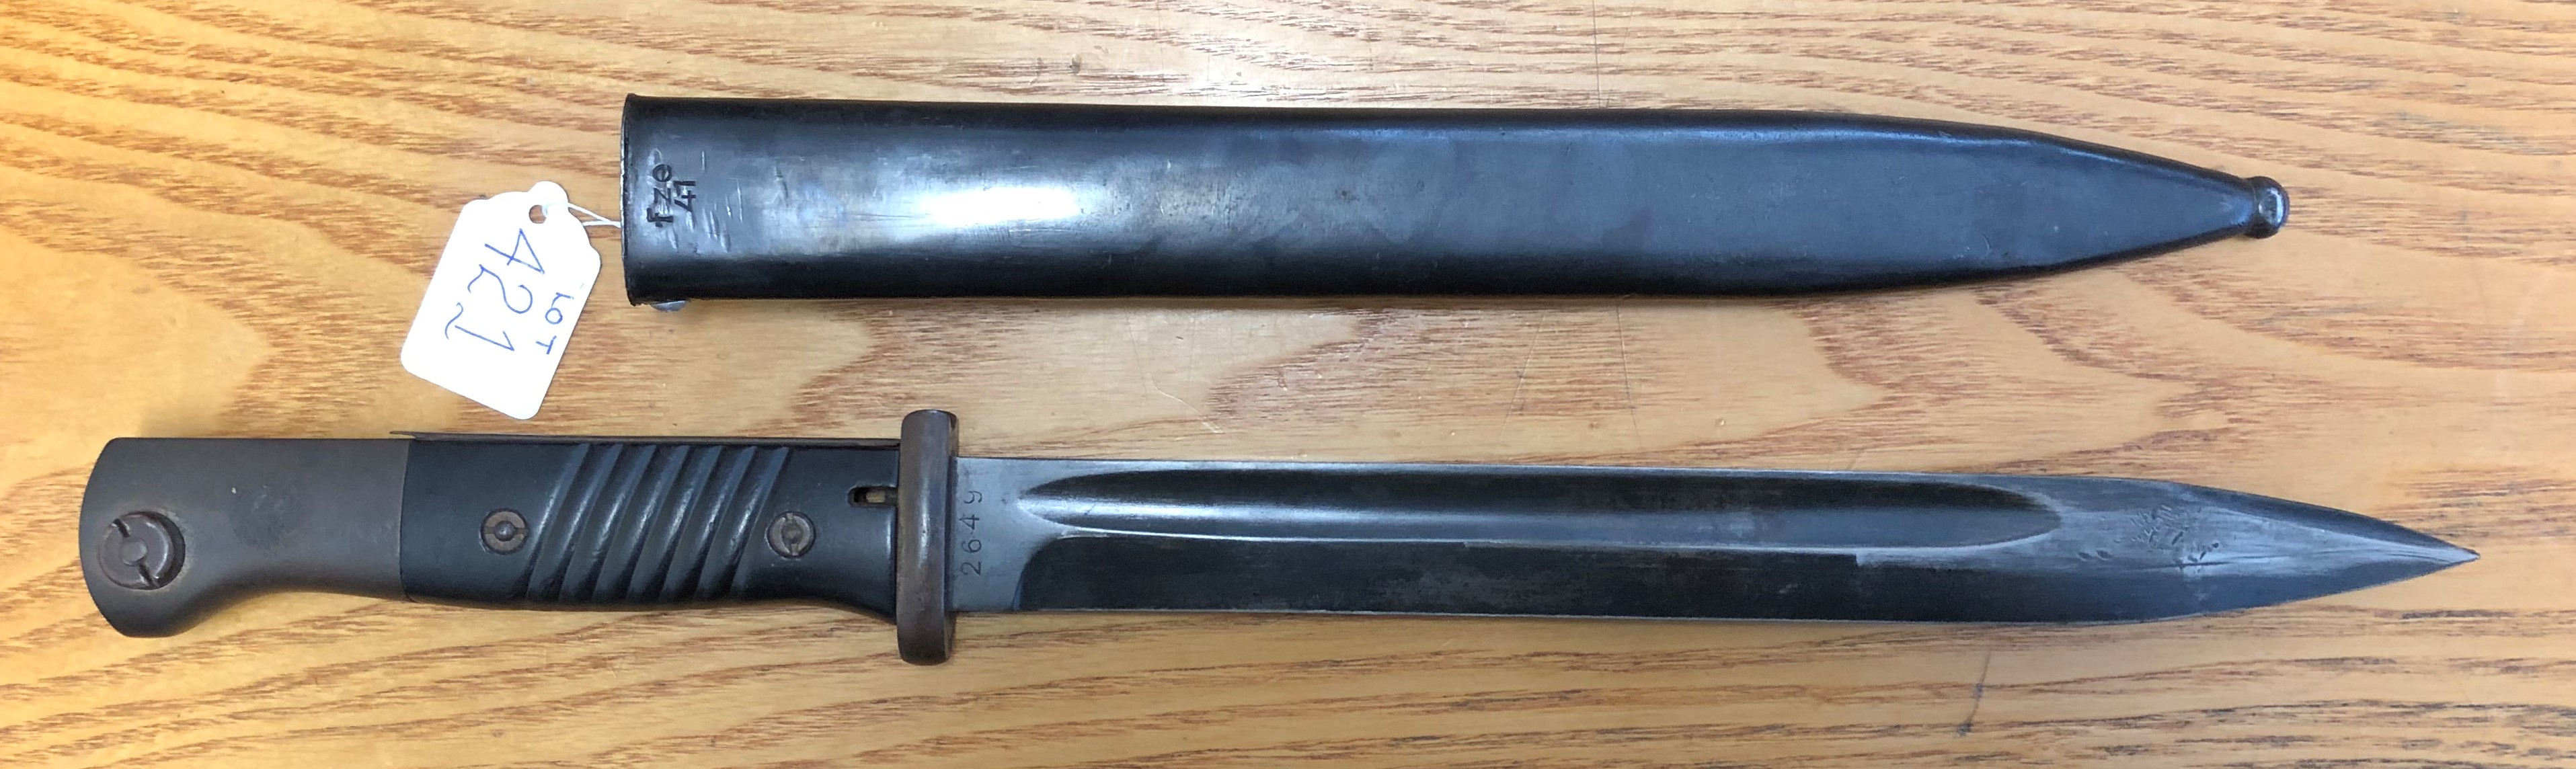 WWII GERMAN K-98 BAYONET WITH SCABBARD - Image 4 of 6